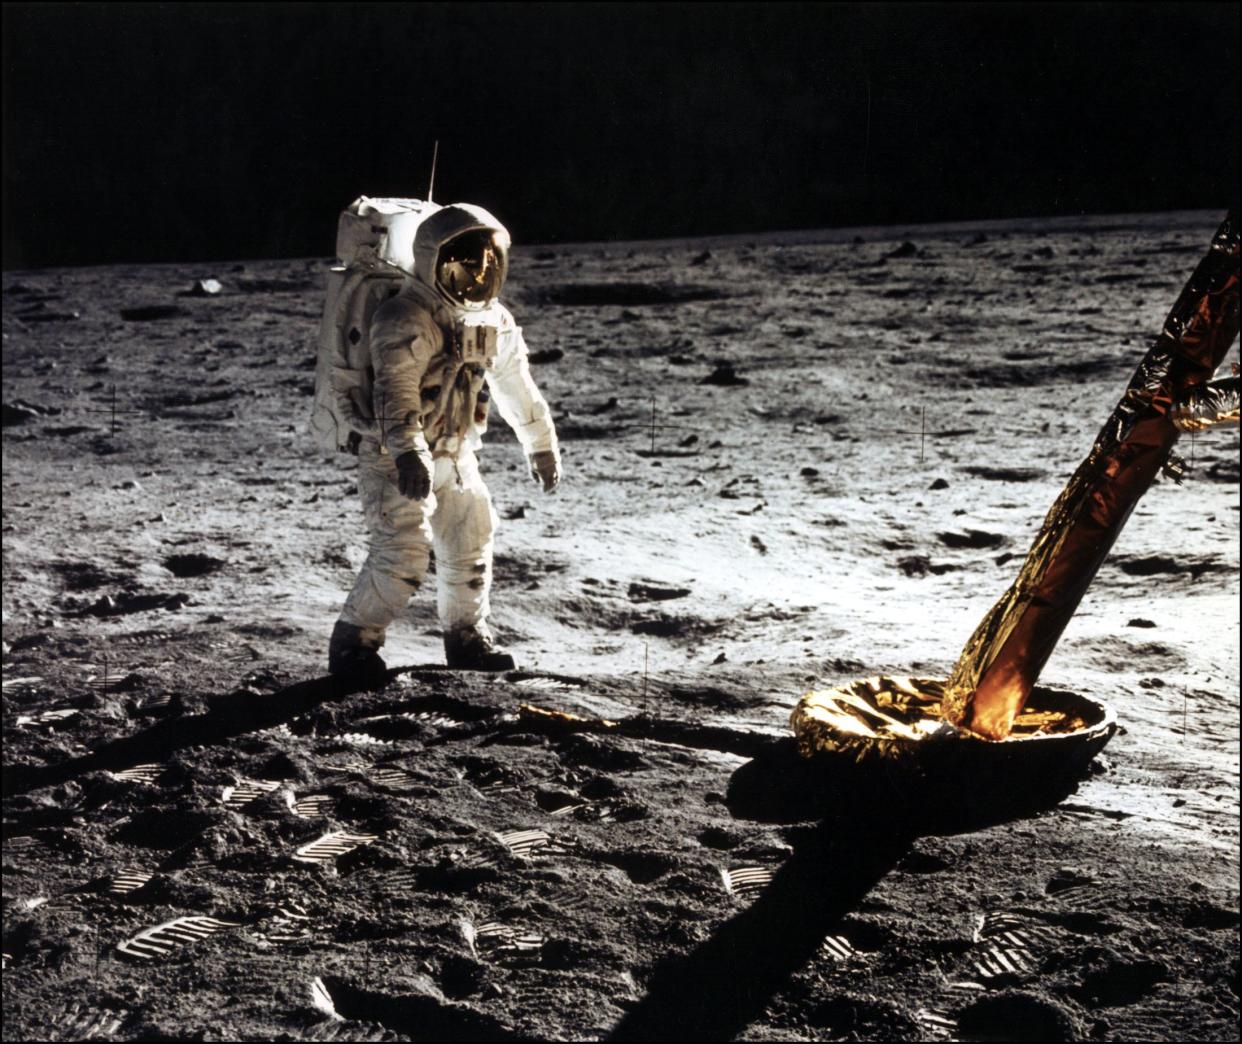 Buzz Aldrin walking on the moon in 1969 (AFP via Getty Images)